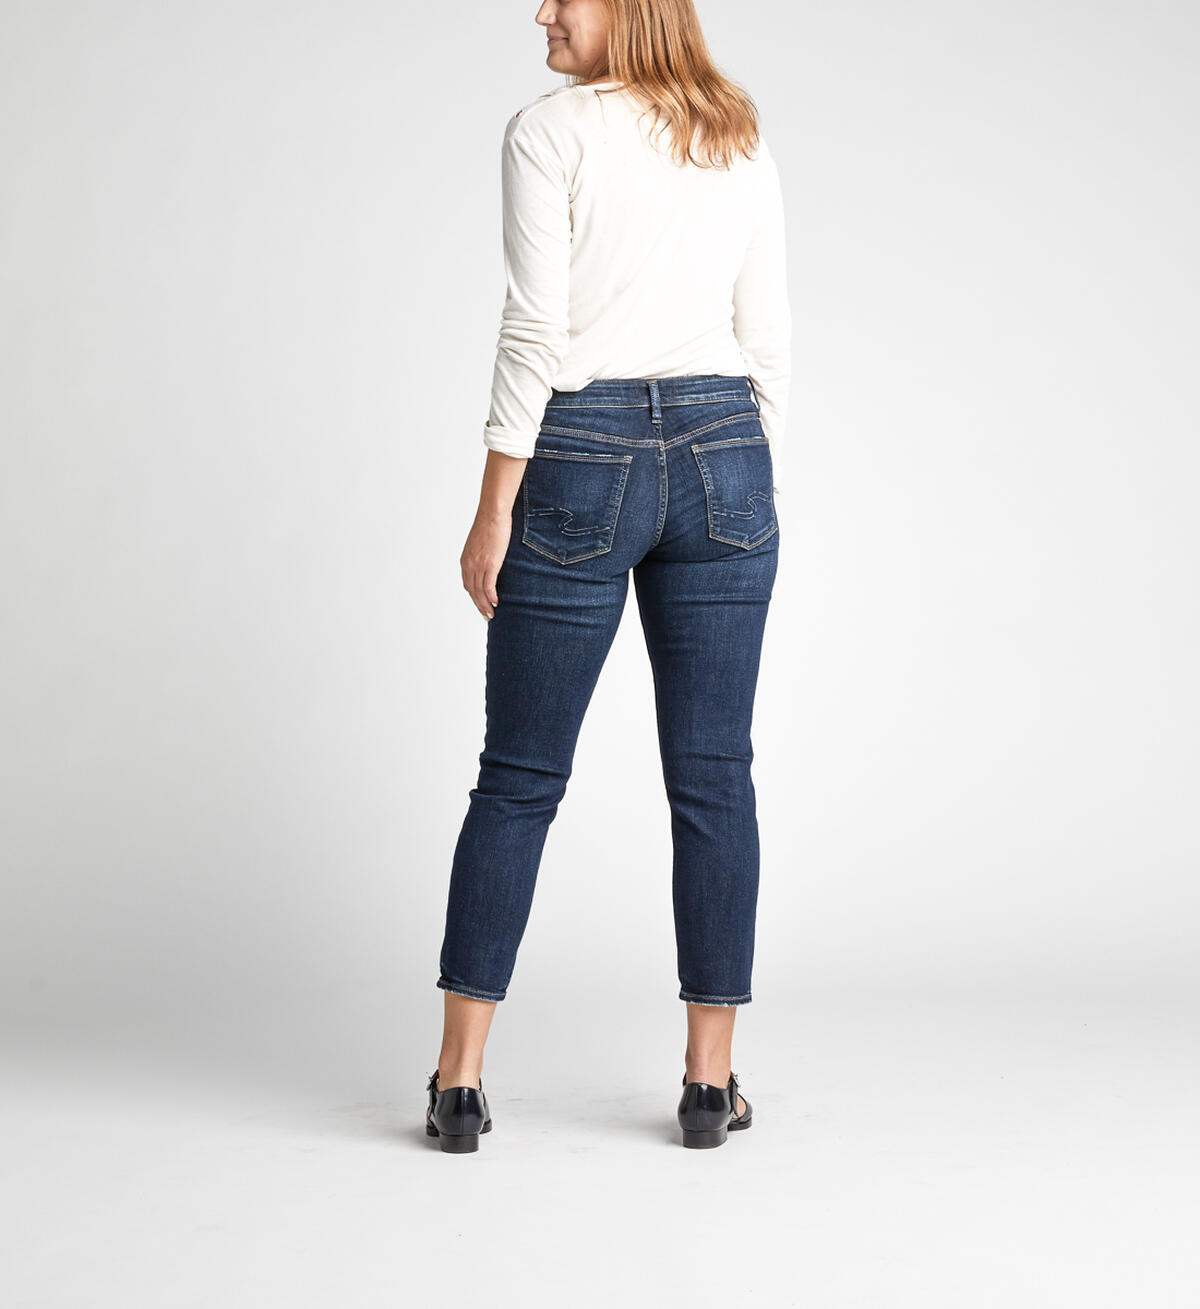 Avery High-Rise Curvy Skinny Crop Jeans, , hi-res image number 5